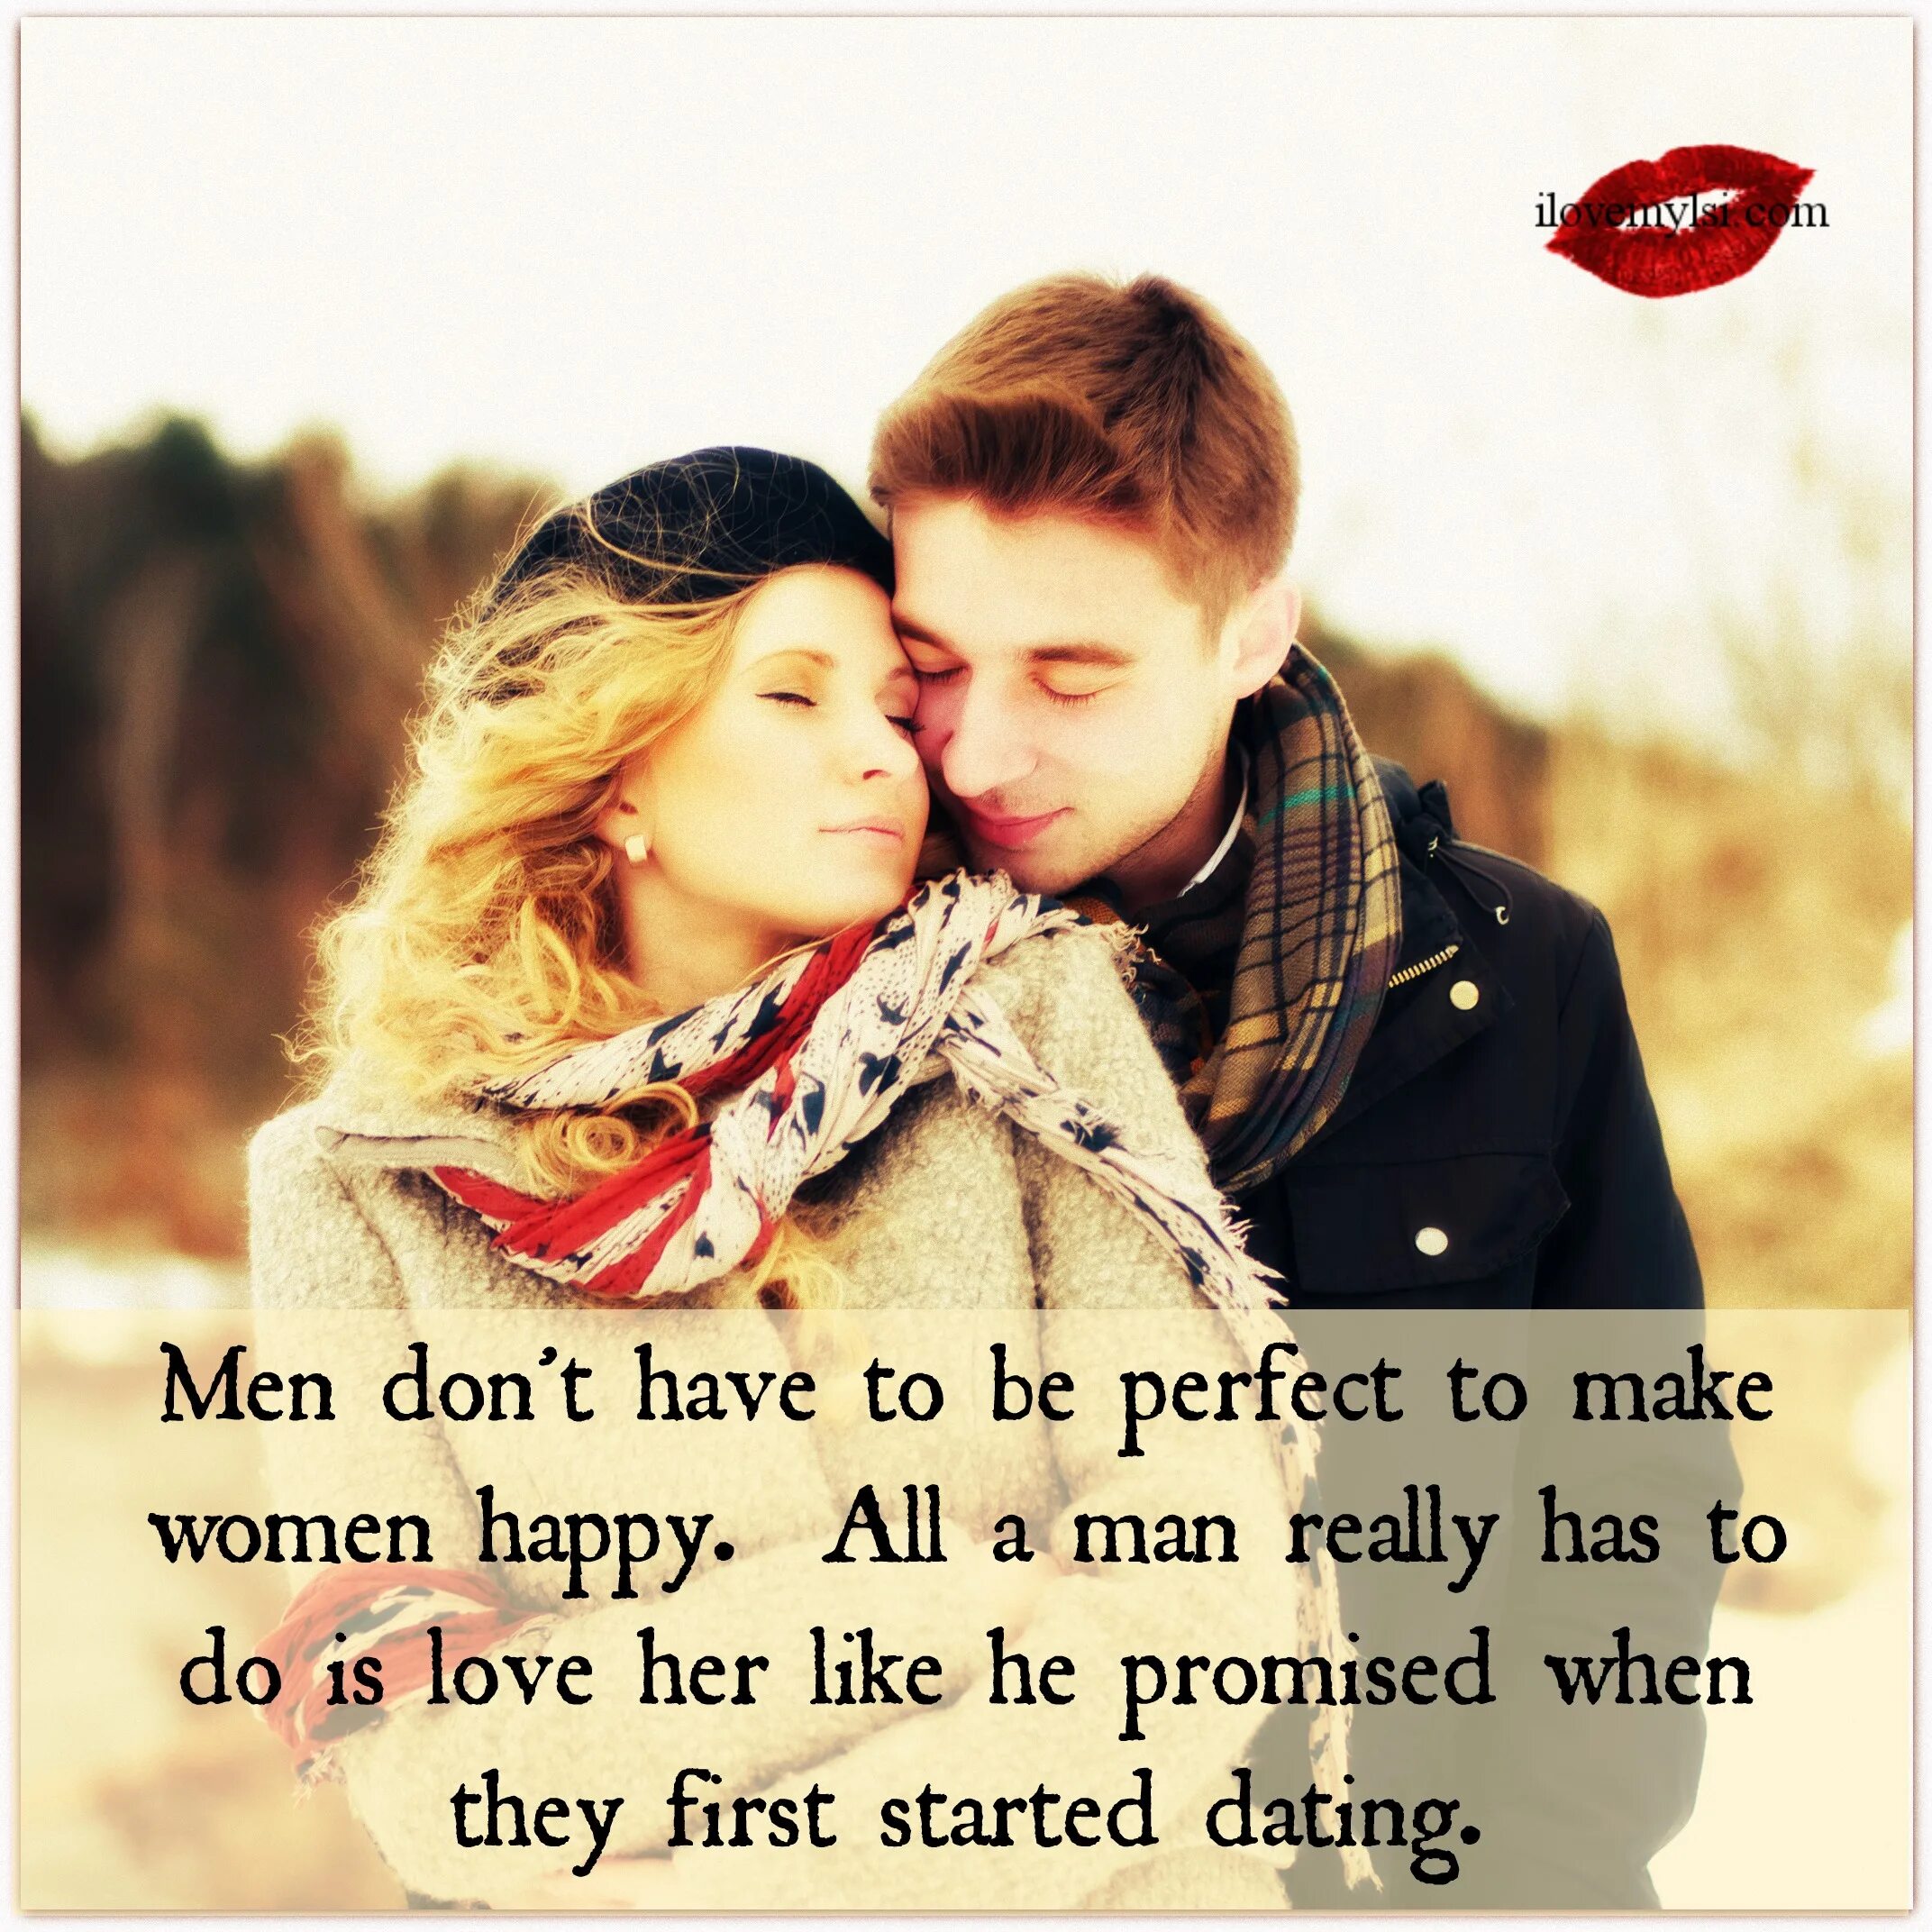 He knows about the man. Quotes about men and women. Quotes about Love. Happy Love quotes. Men women quotations.